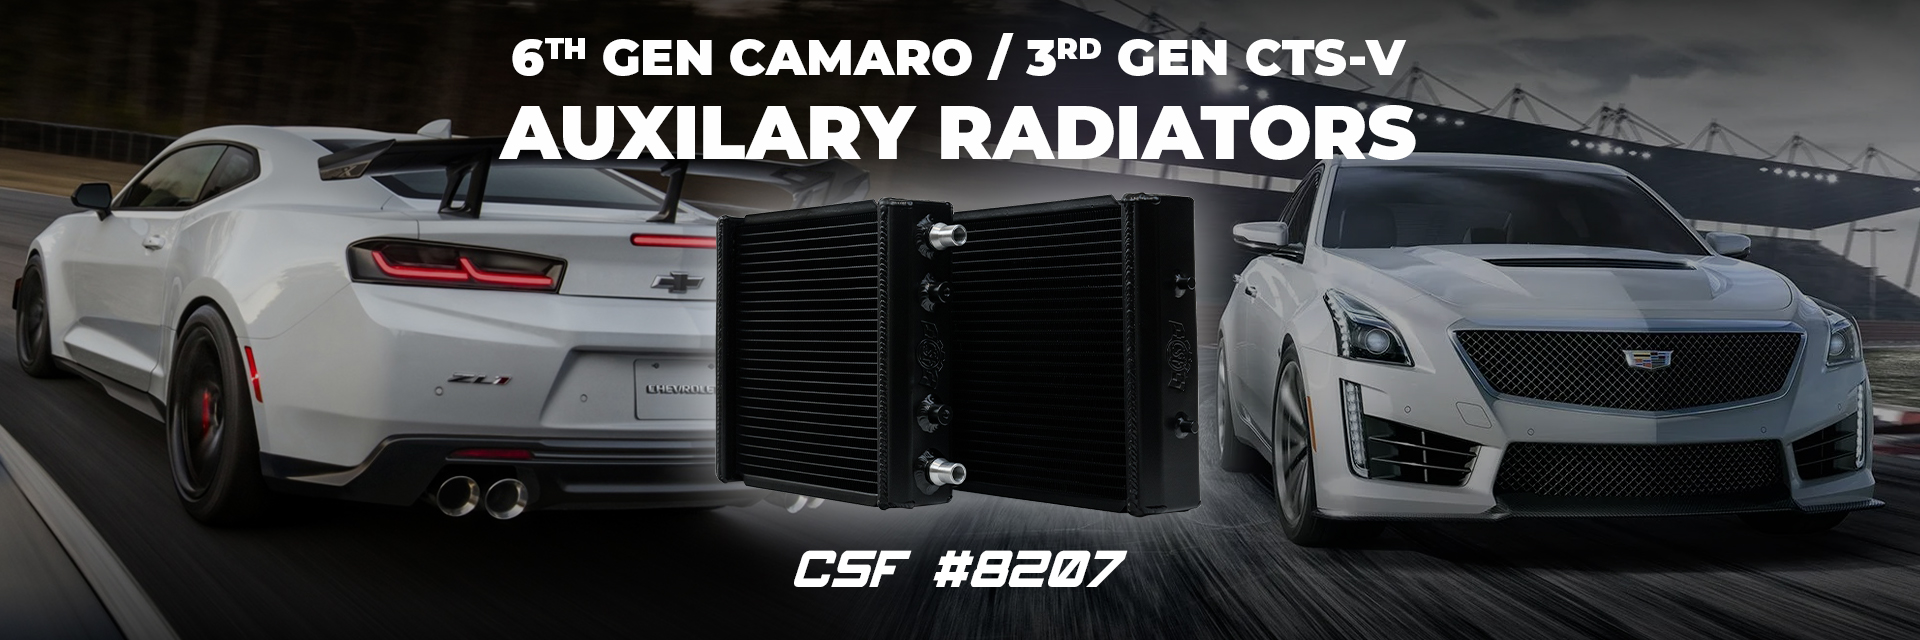 CSF Auxiliary Radiator for 6th Gen Camaro & 3rd Gen CTS-V Blog Header Image